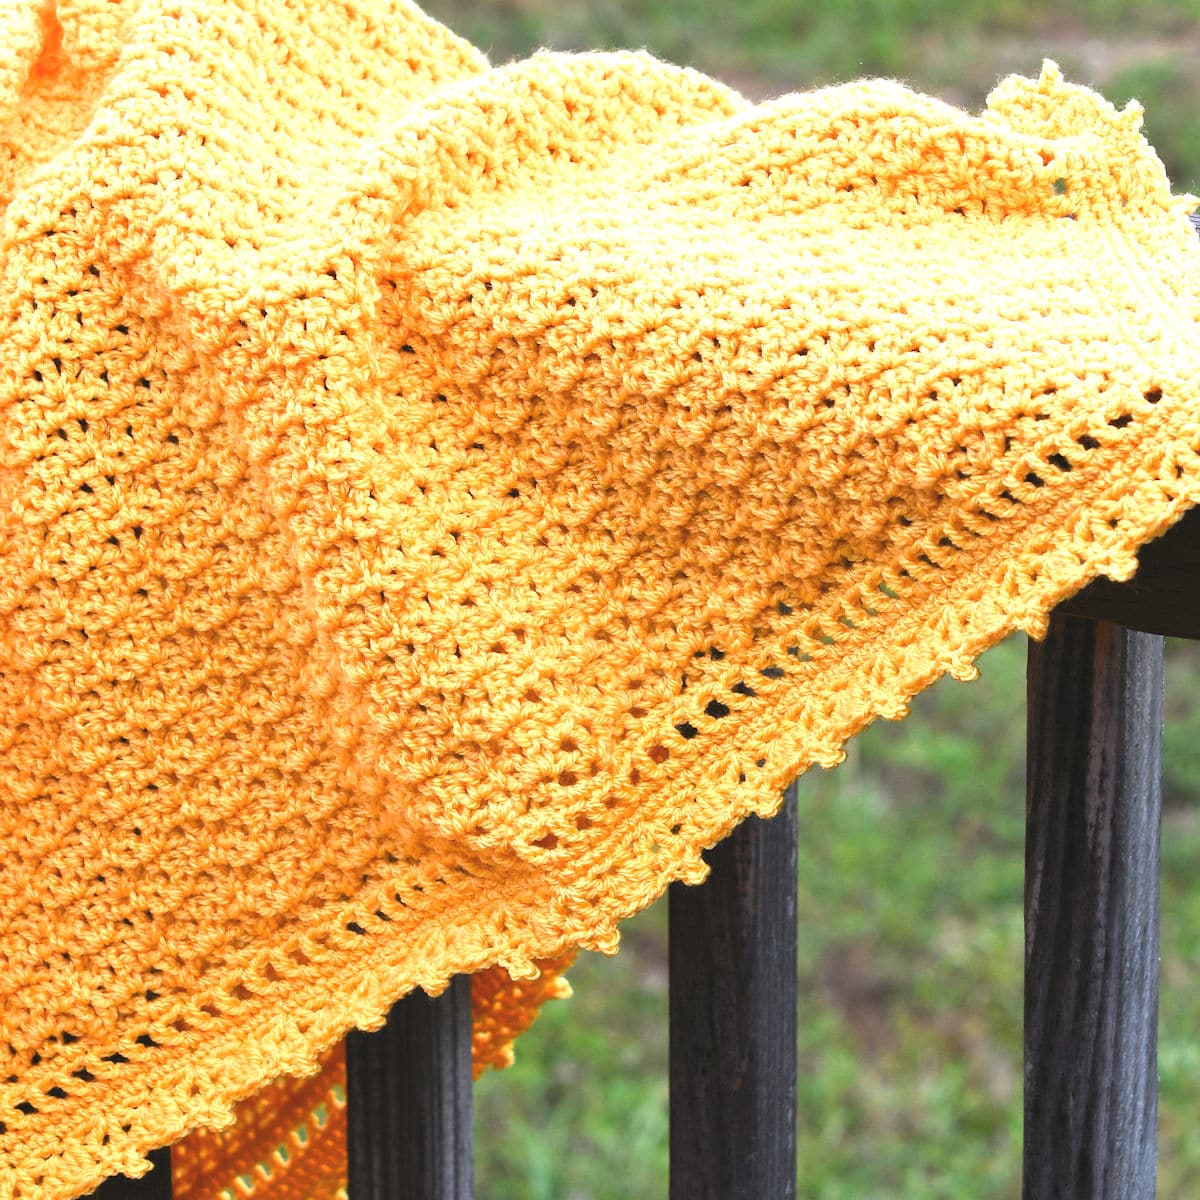 Crocheted Baby Blanket draped on wooden fence